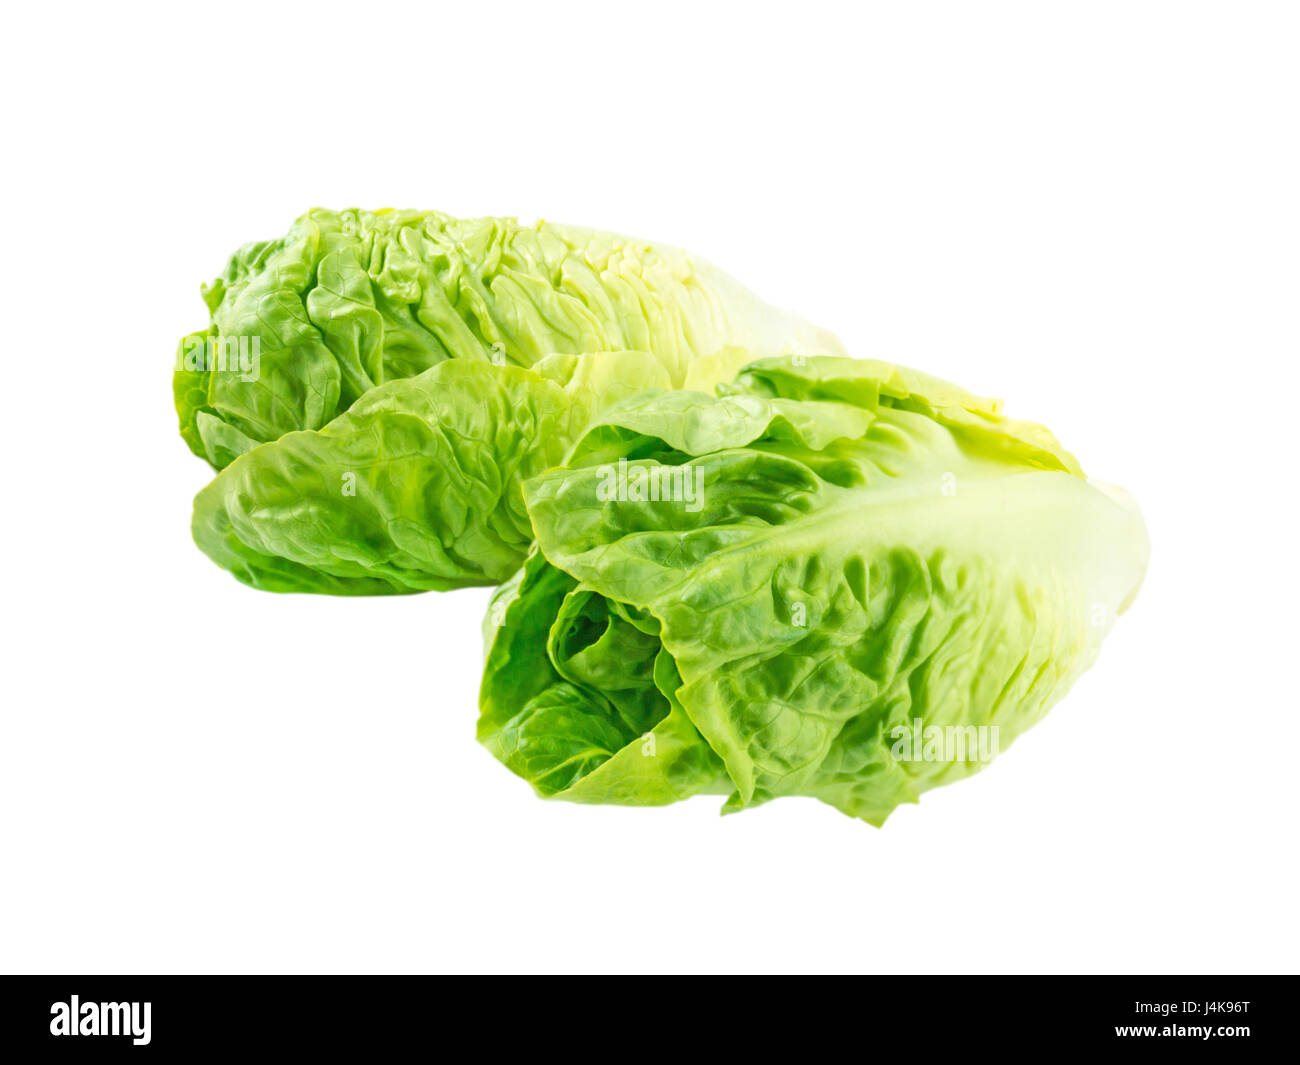 Two baby cos lettuce salad heads isolated on white Stock Photo